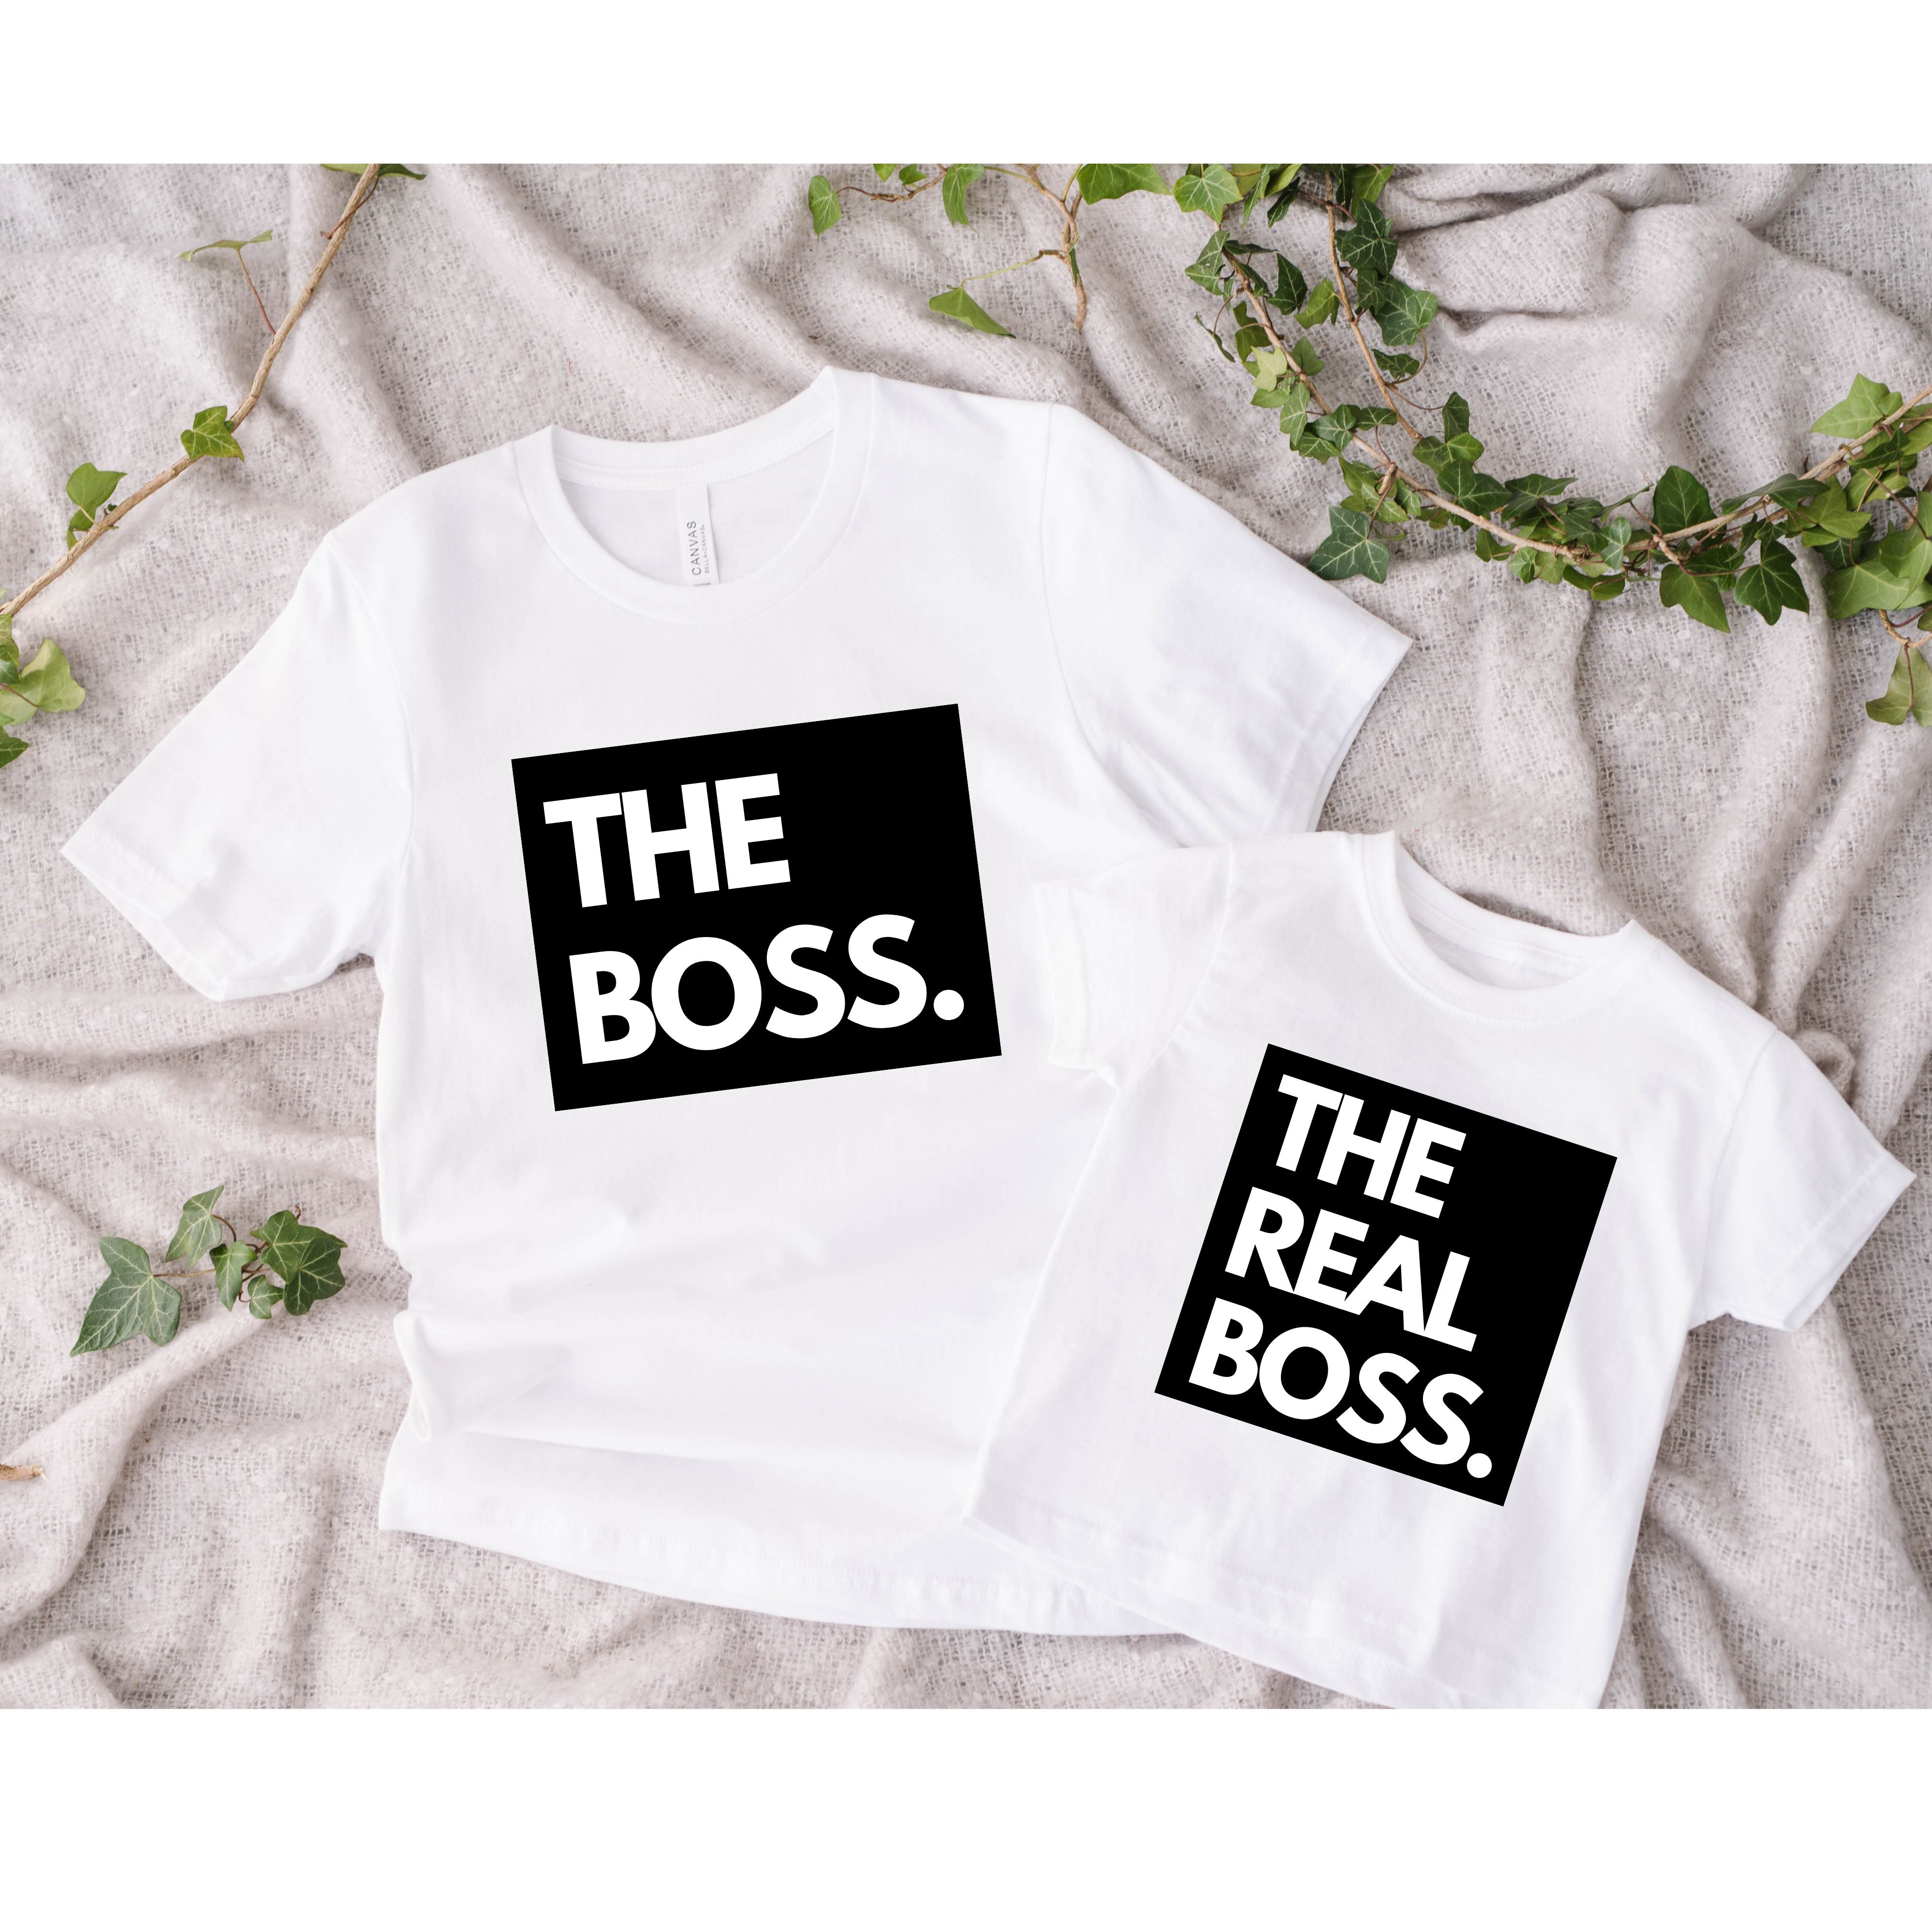 THE BOSS THE REAL BOSS TSHIRT